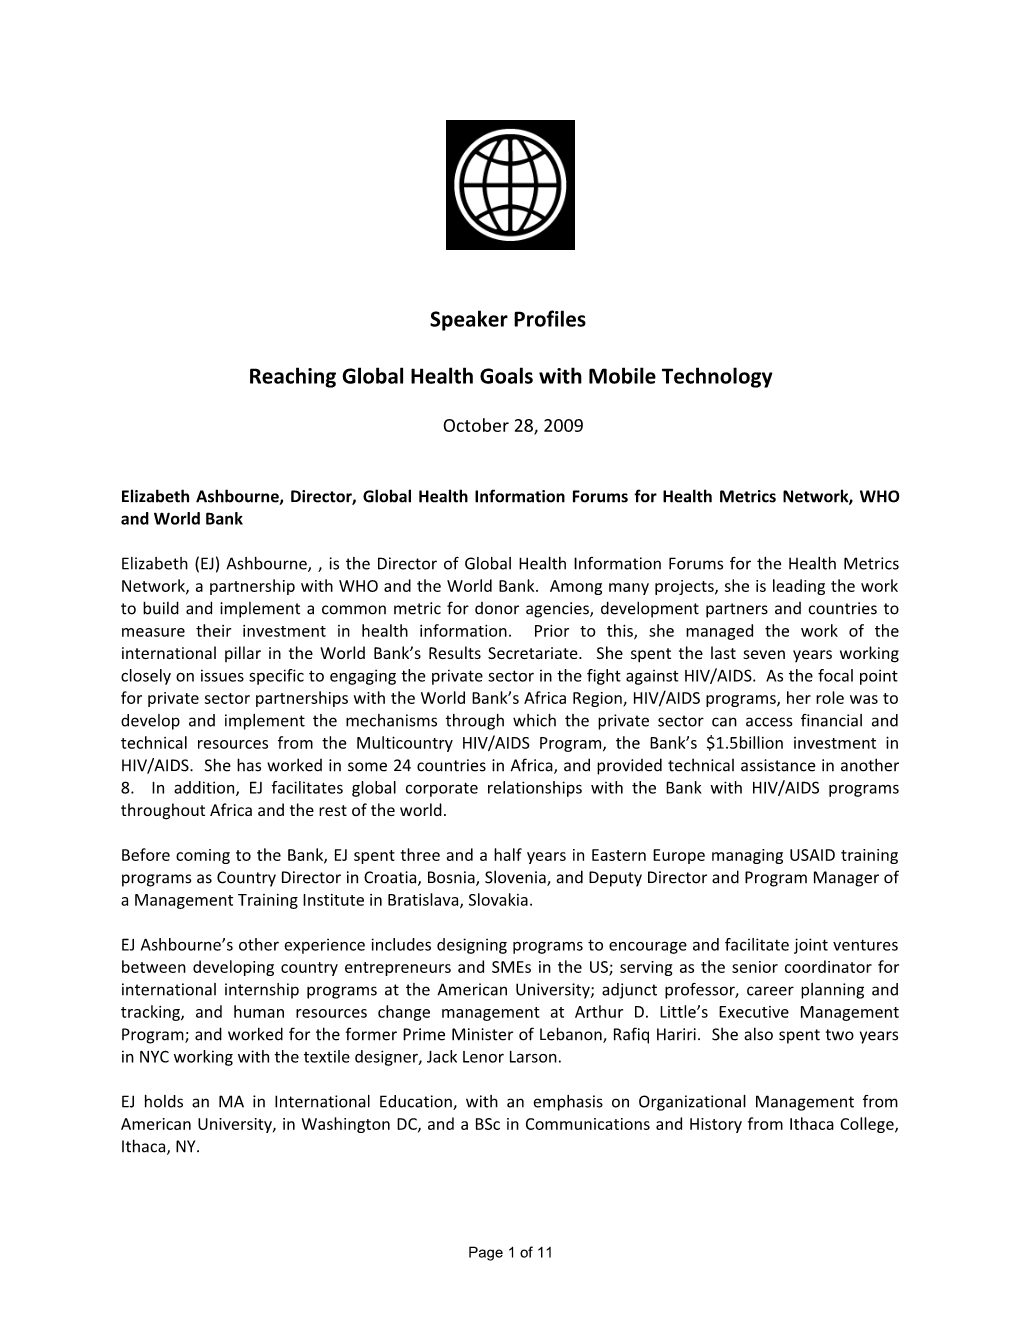 Reaching Global Health Goals with Mobile Technology